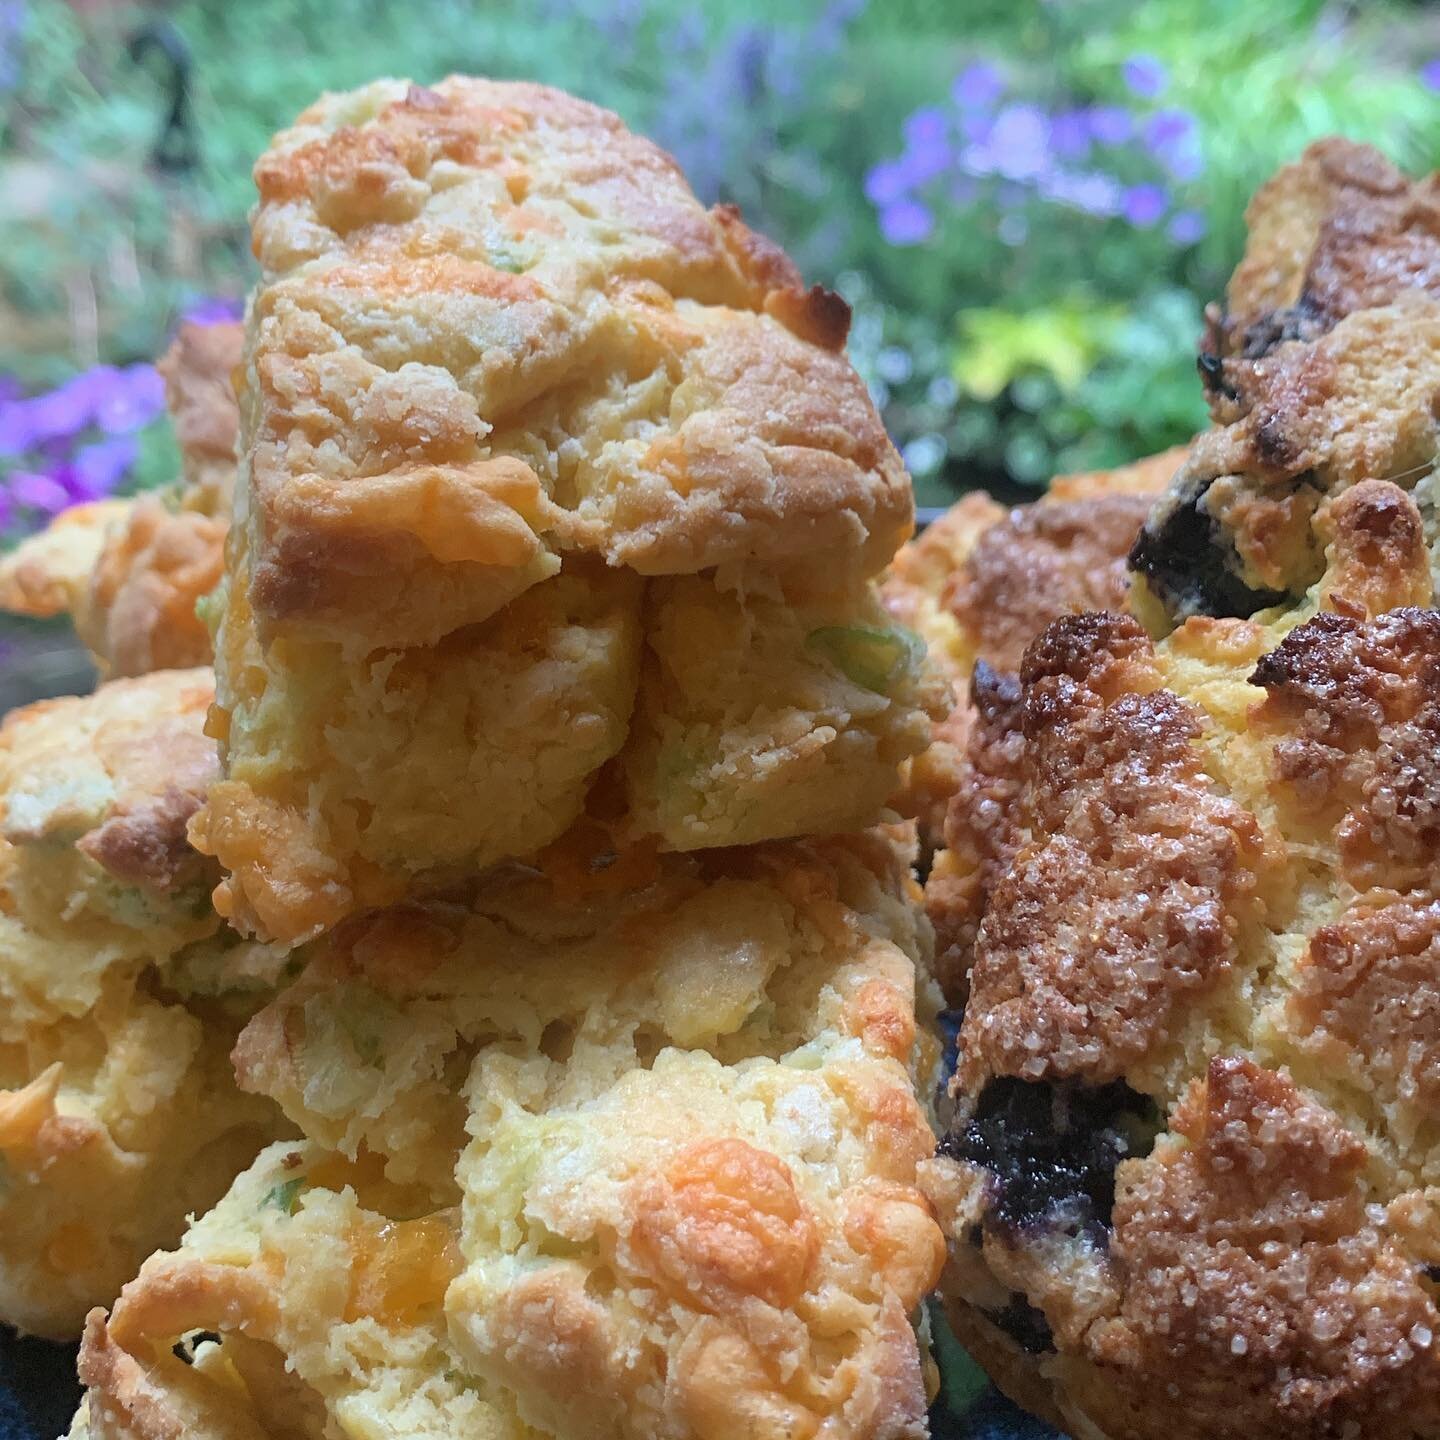 I&rsquo;ve got my A-game on today kids! Fresh organic blueberry lemons scones, organic chai shortbread, organic cheddar &amp; green onion scones, house-chai made with organic ginger and cardamom on the stove - what more could you ask for on a warm dr